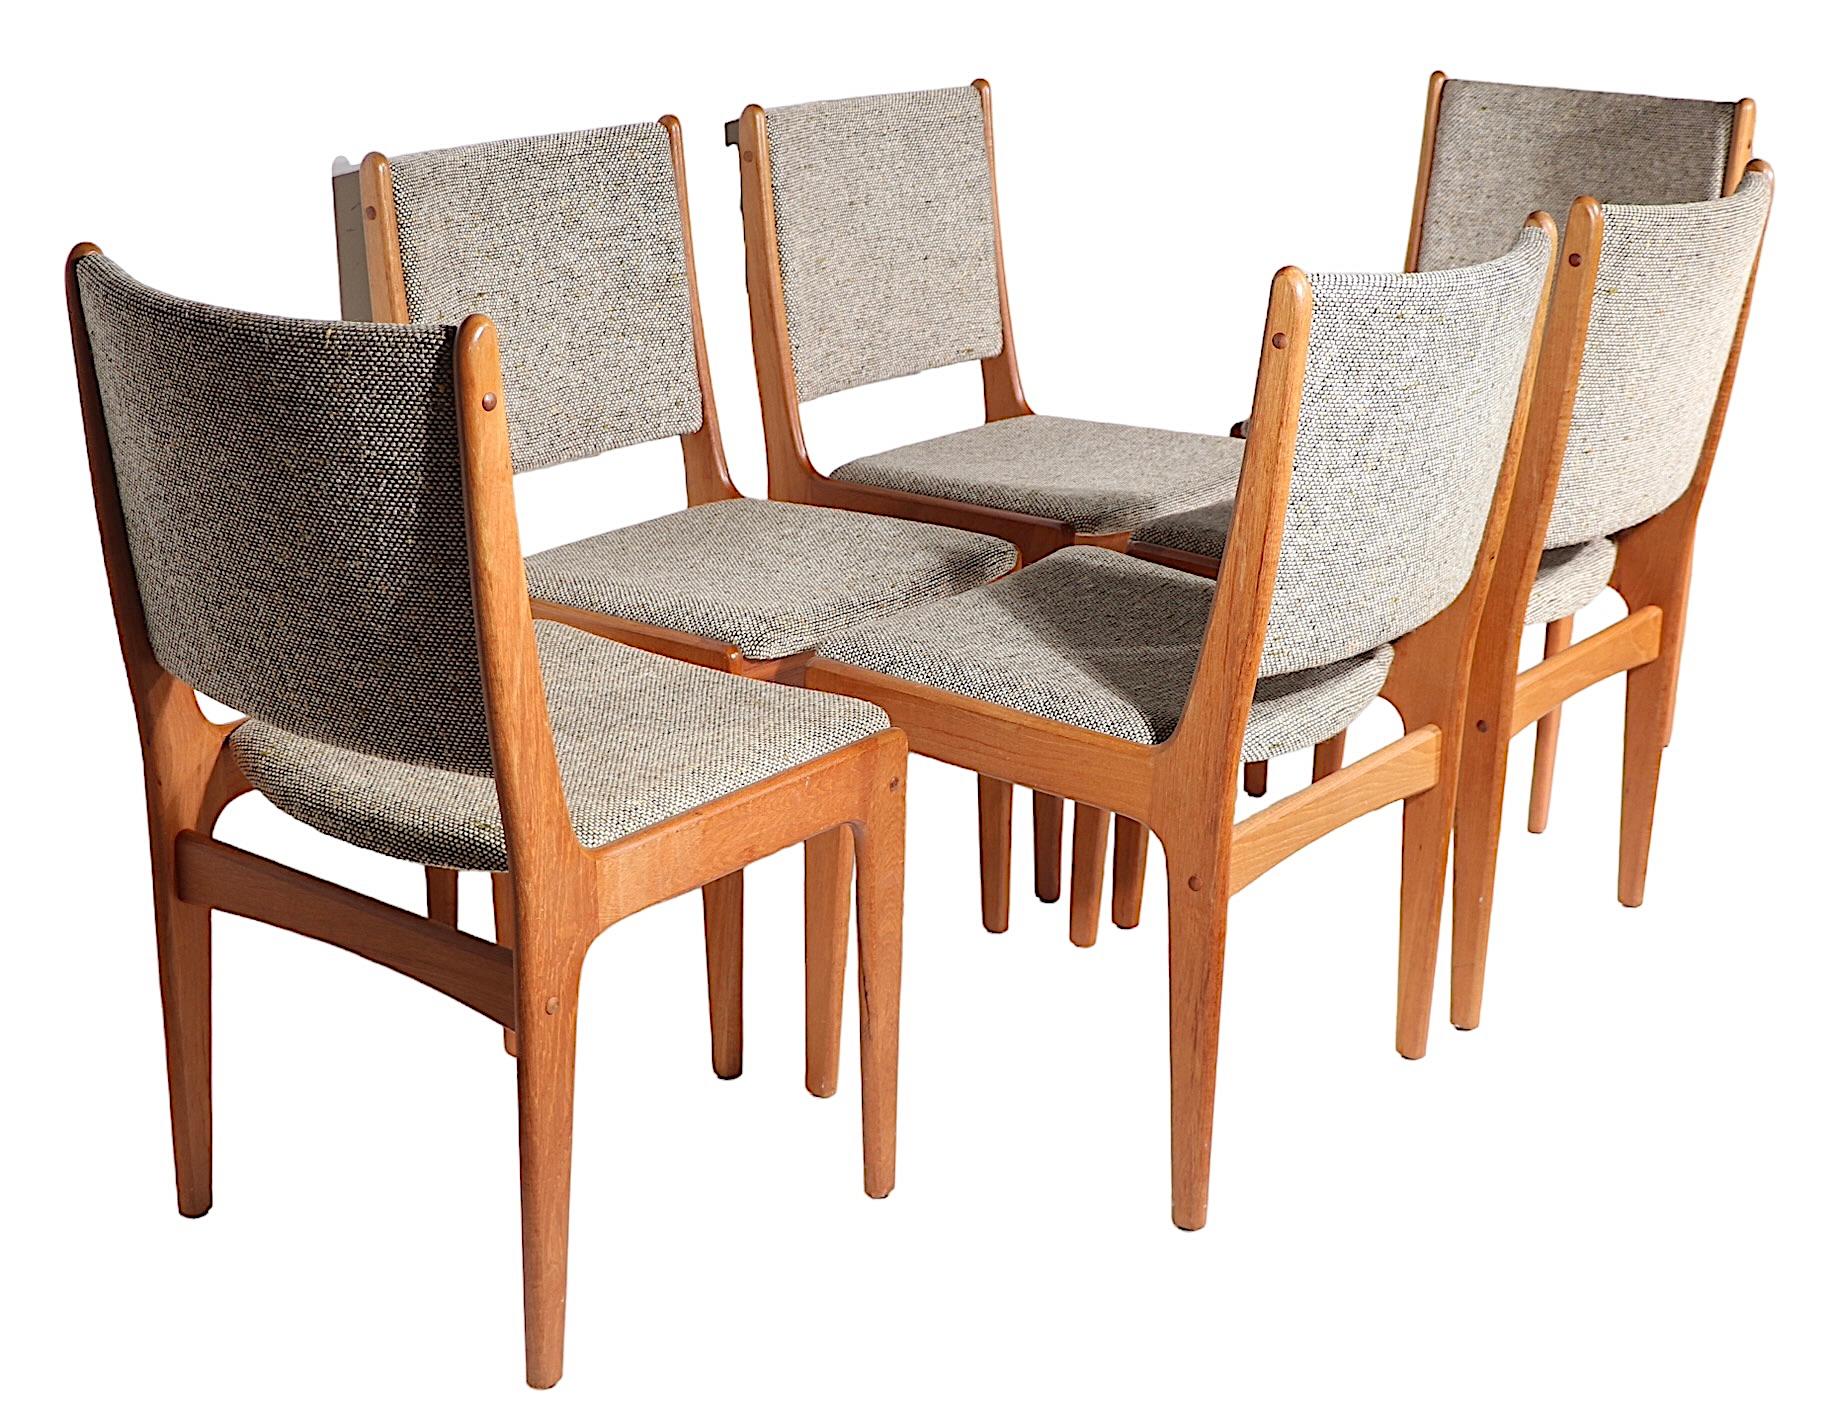 20th Century Danish Mid Century Modern Dining Chairs by Johannes Andersen for Uldum Mobler  For Sale